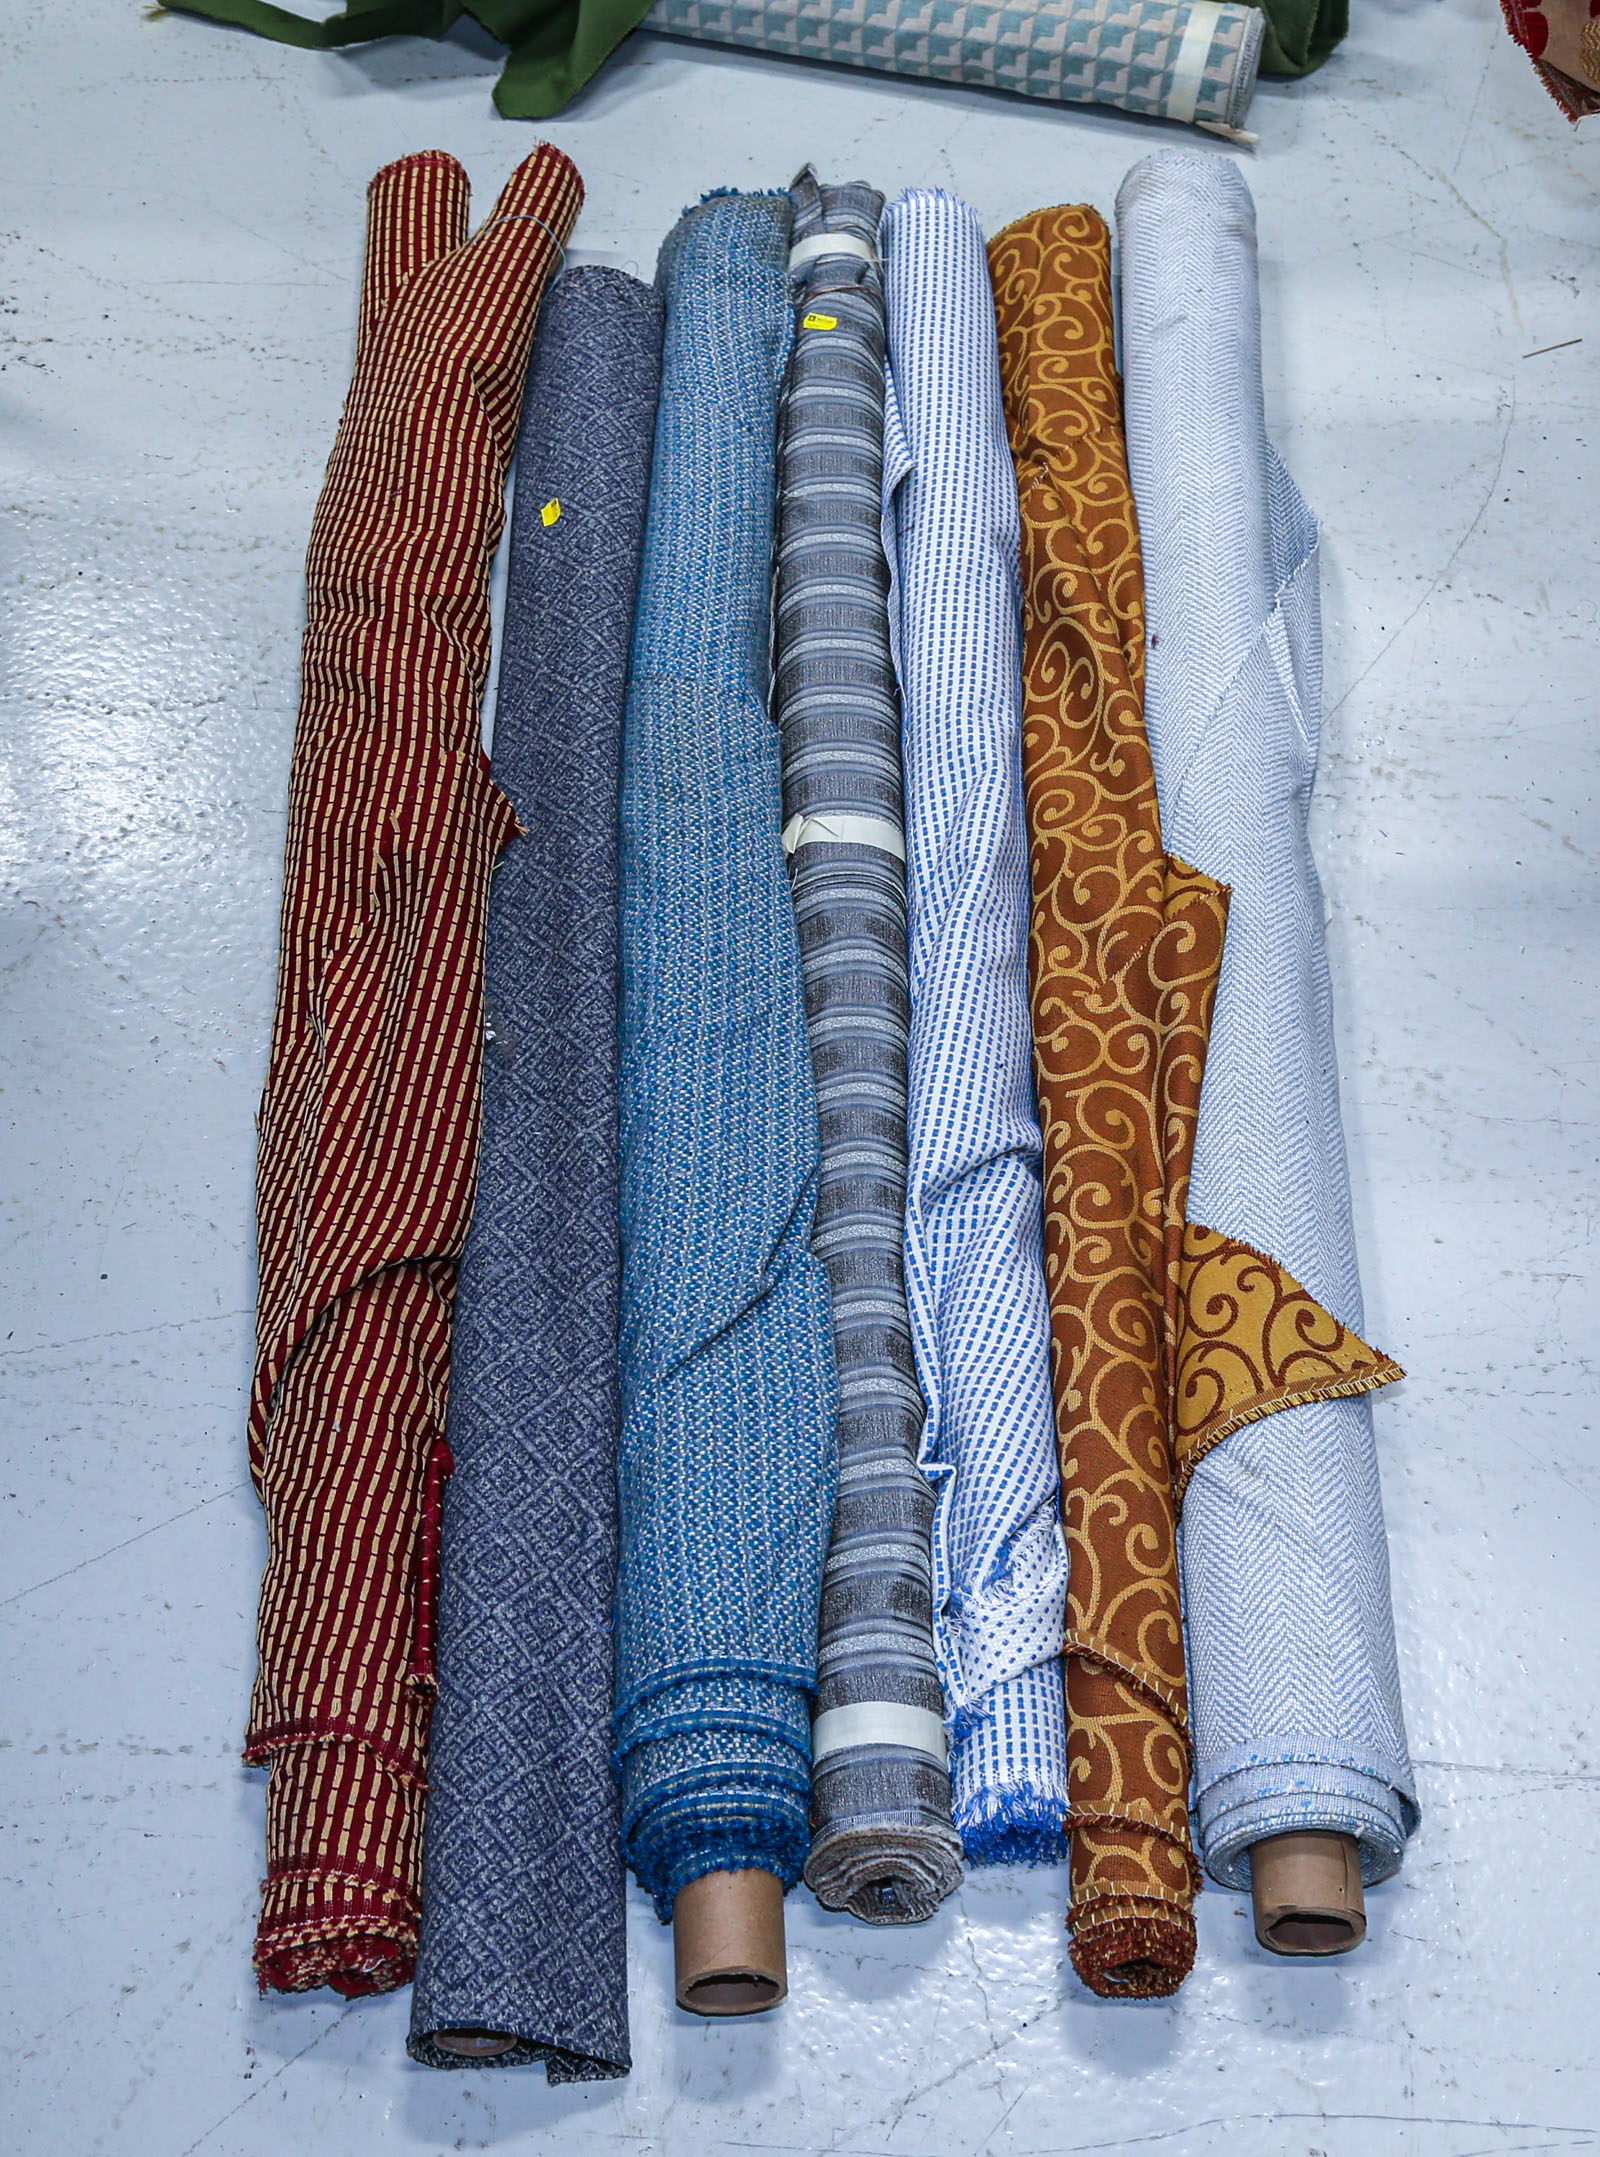 SEVEN BOLTS OF UPHOLSTERY FABRIC .